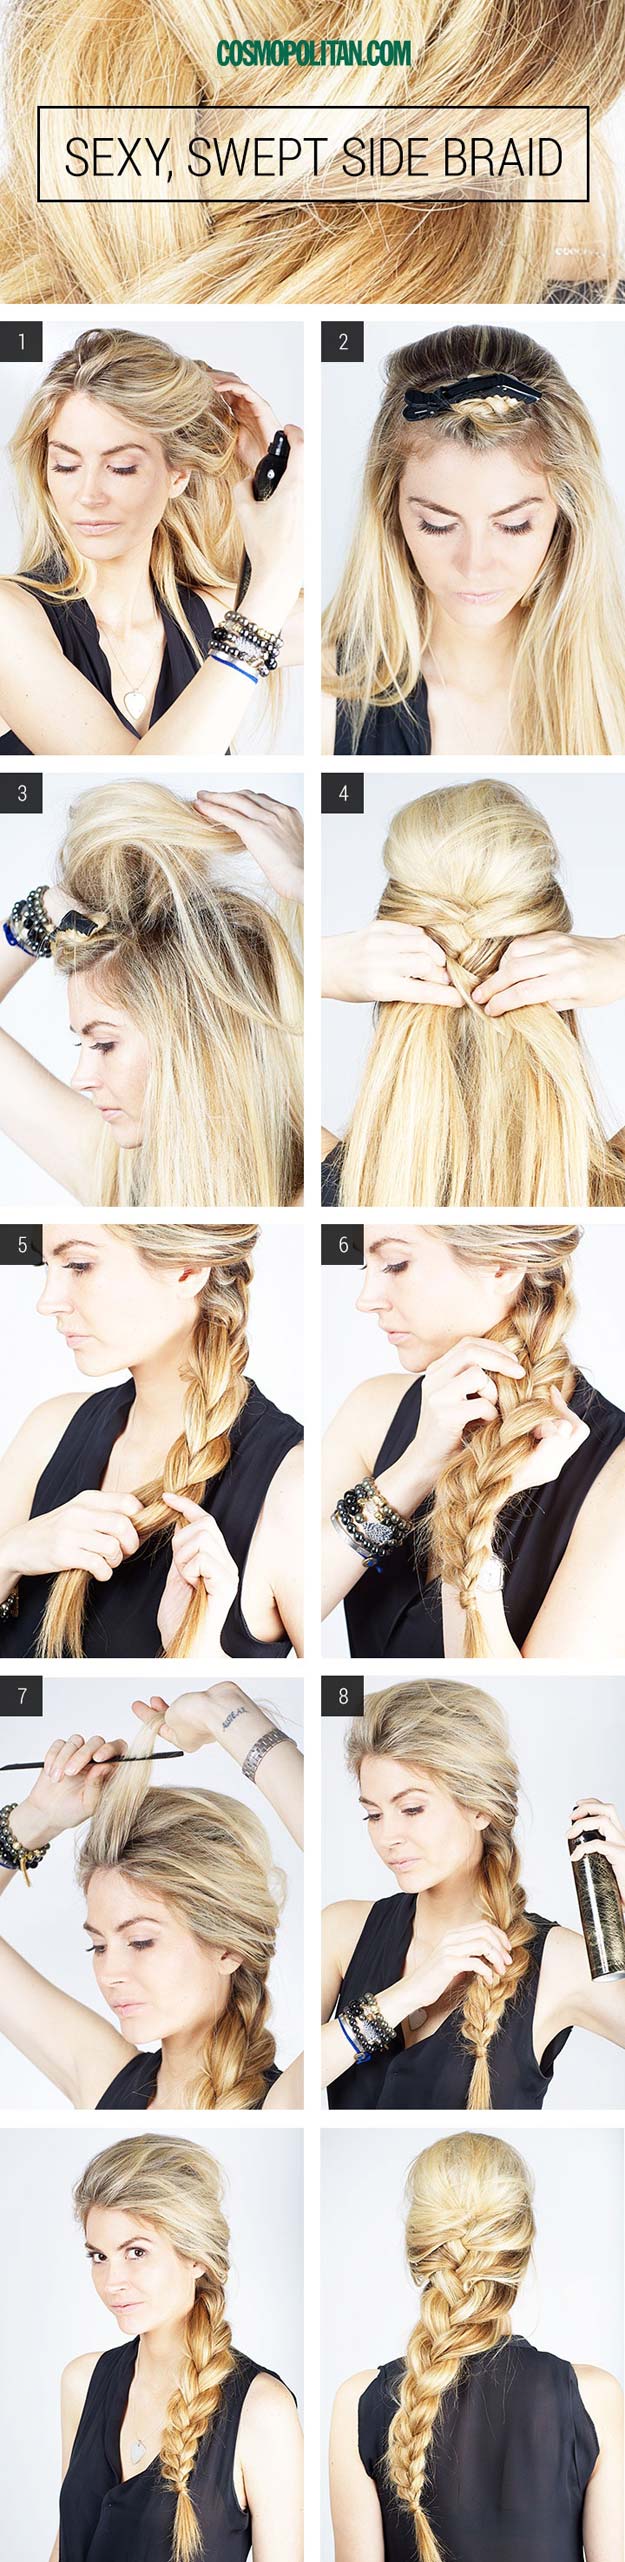 Best Hairstyles for Long Hair - Sexy Swept Side Braid - Step by Step Tutorials for Easy Curls, Updo, Half Up, Braids and Lazy Girl Looks. Prom Ideas, Special Occasion Hair and Braiding Instructions for Teens, Teenagers and Adults, Women and Girls 